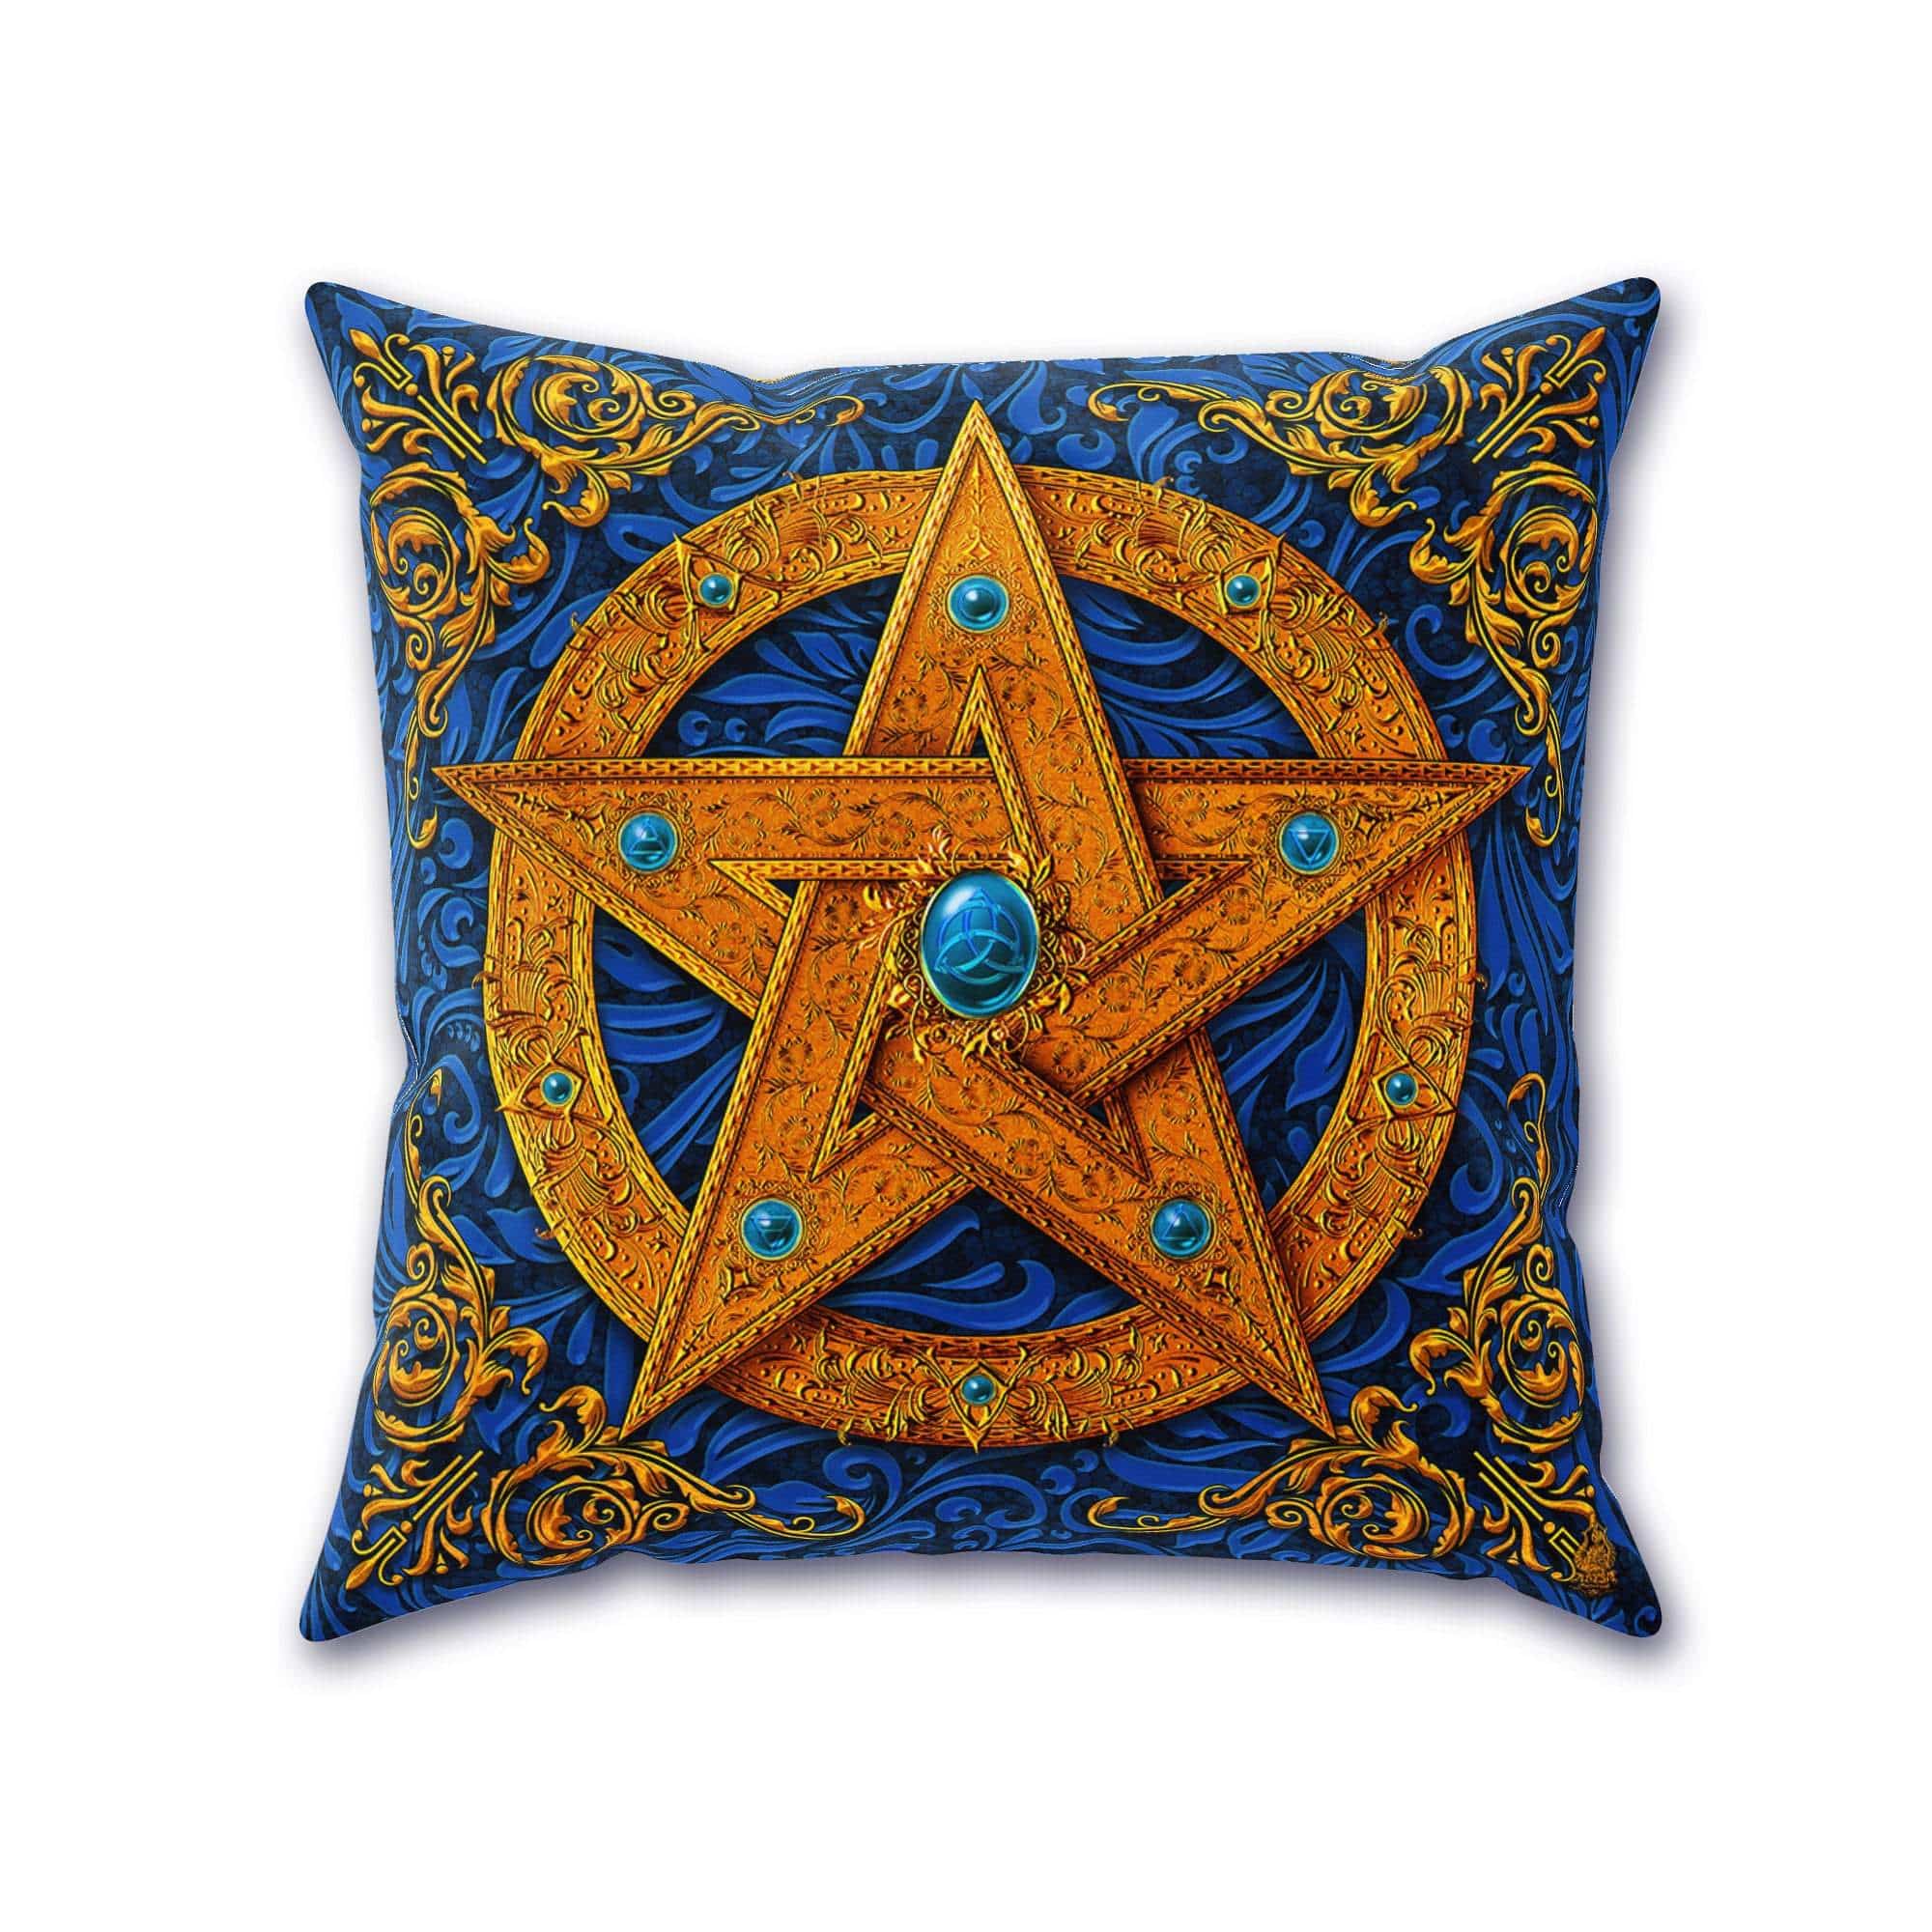 Pentacle Throw Pillow, Decorative Accent Cushion, Witchy, Wiccan Room Decor, Pagan Art, Funky and Eclectic Home - Blue - Abysm Internal